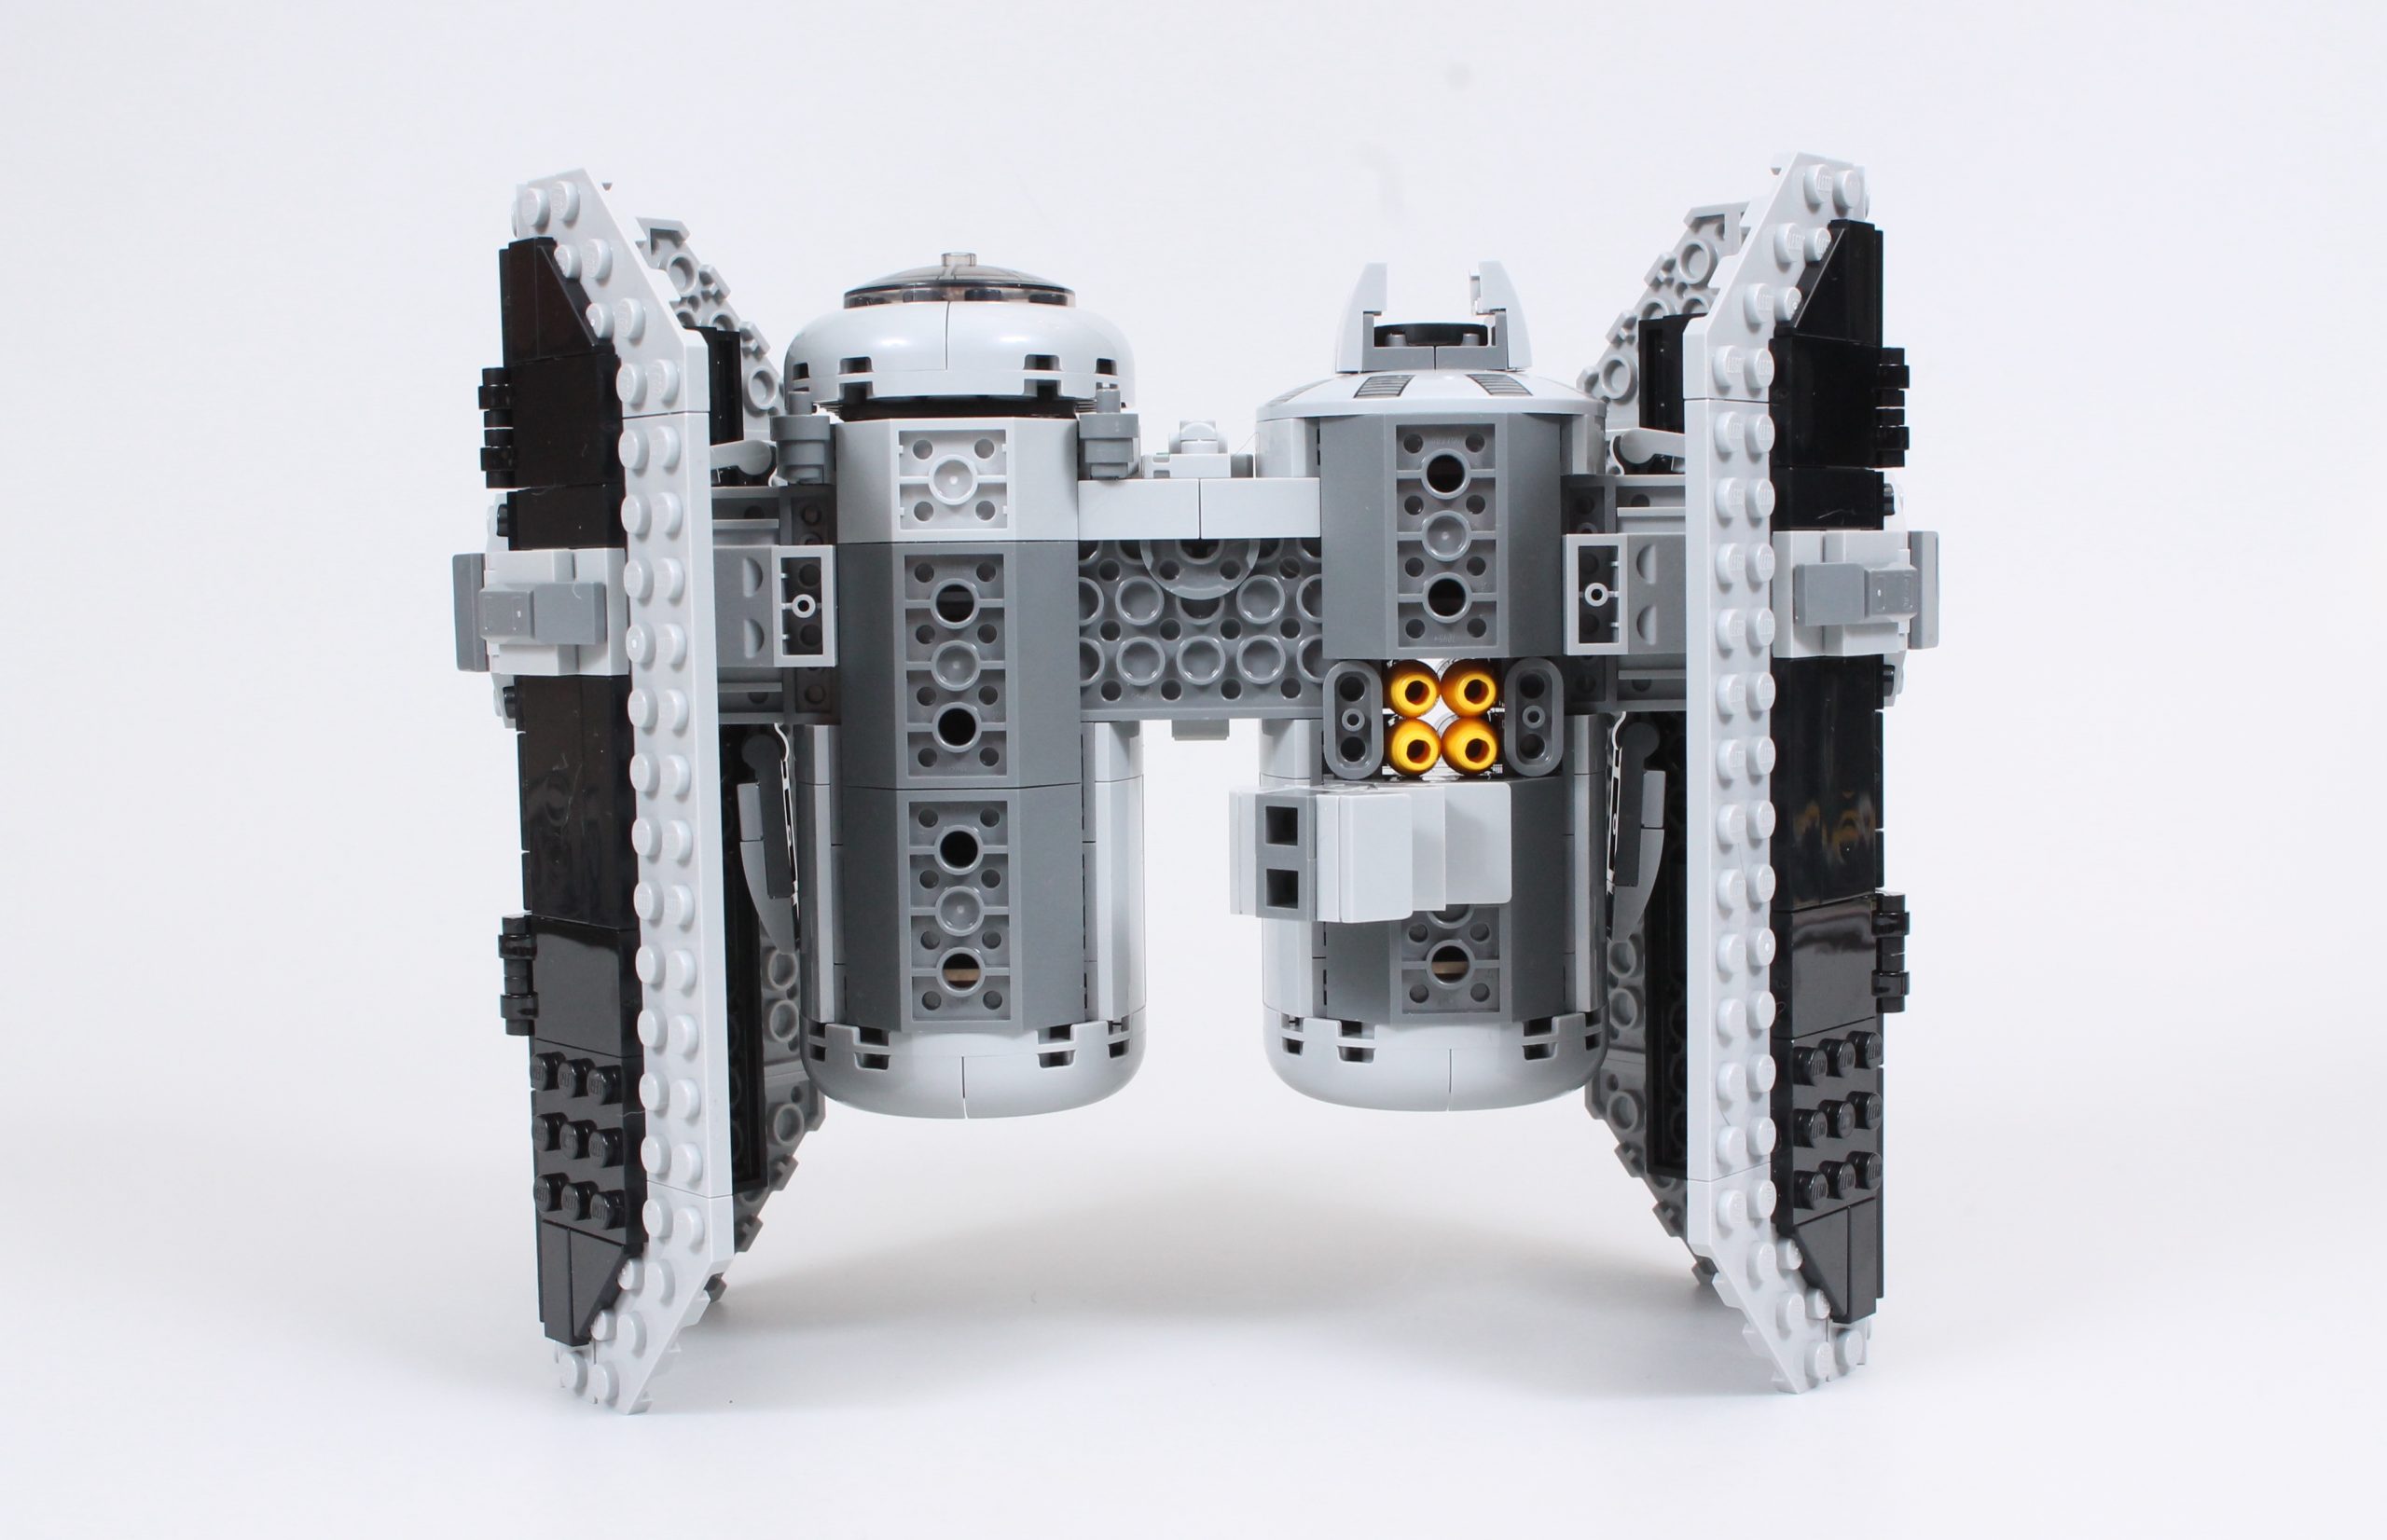 PSA: Every minifigure in LEGO 75347 TIE Bomber is brand new